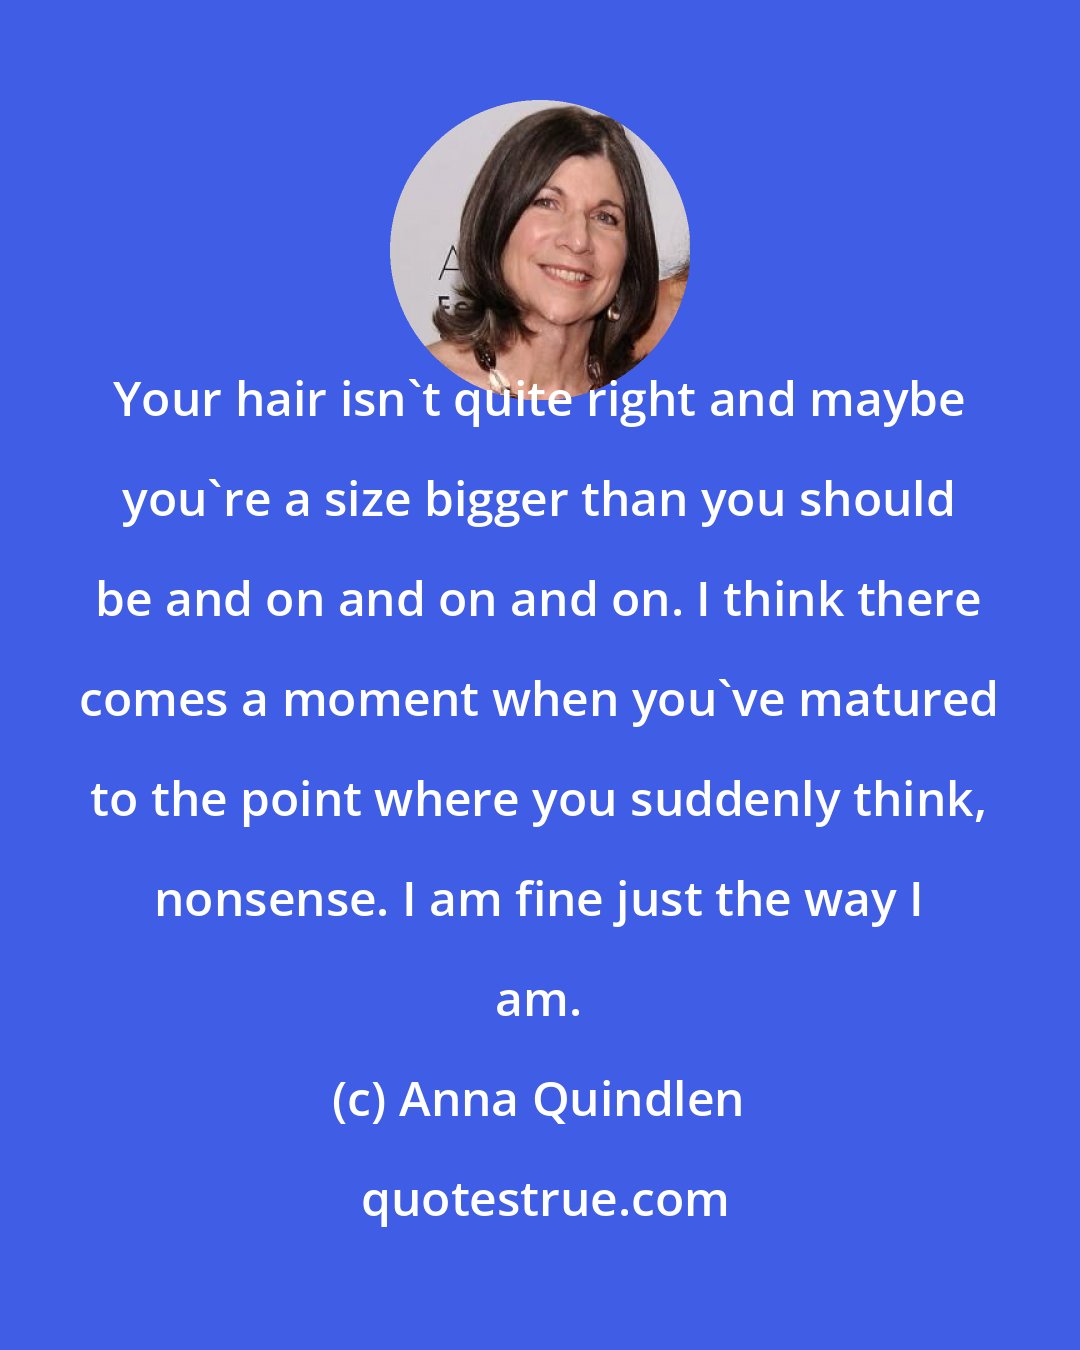 Anna Quindlen: Your hair isn't quite right and maybe you're a size bigger than you should be and on and on and on. I think there comes a moment when you've matured to the point where you suddenly think, nonsense. I am fine just the way I am.